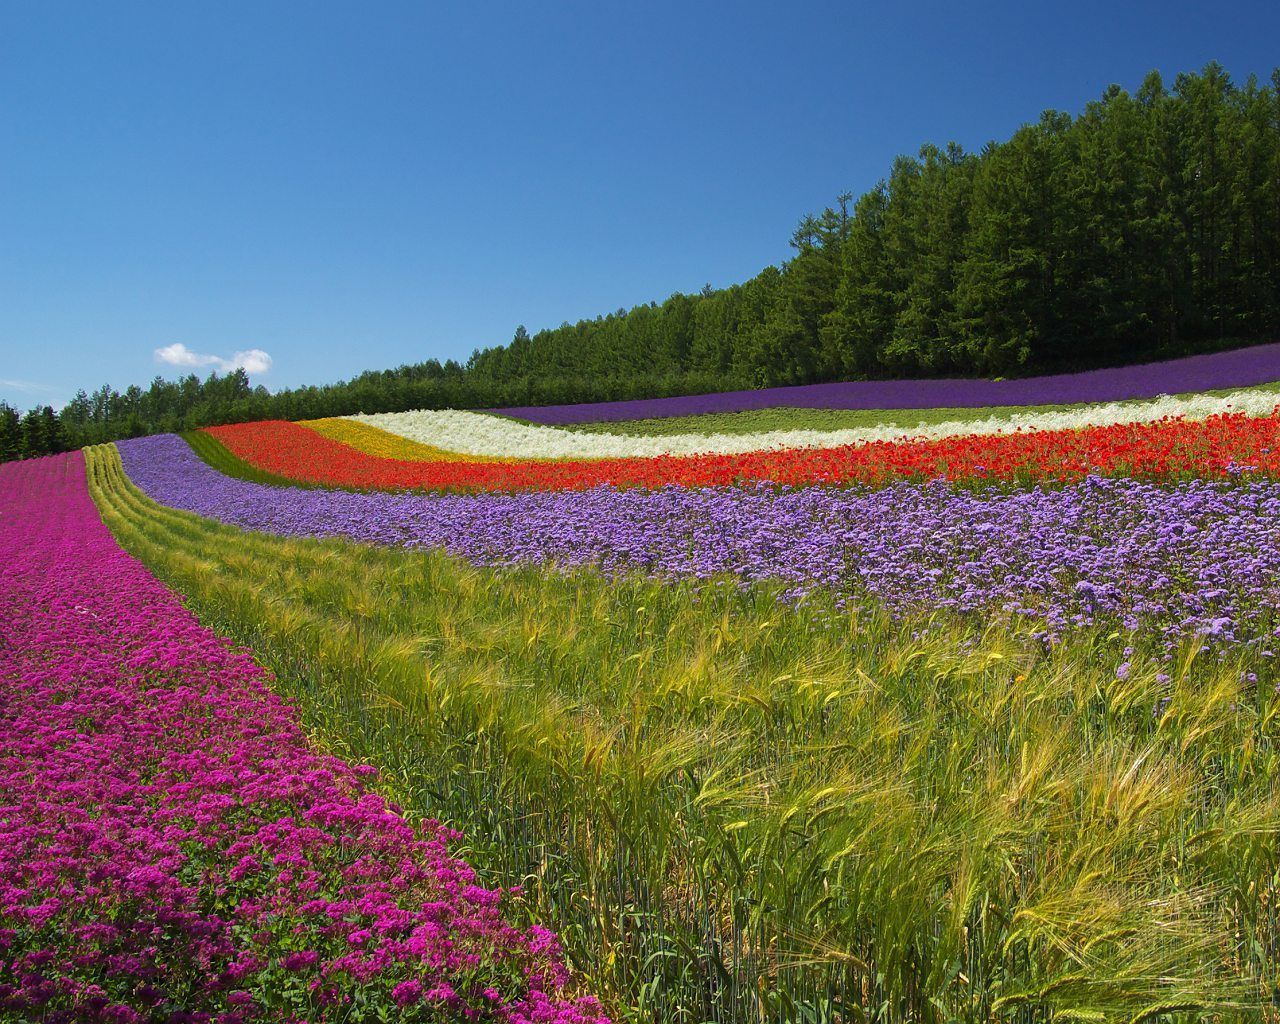 A field of colorful flowers with a forest in the background. - Farm